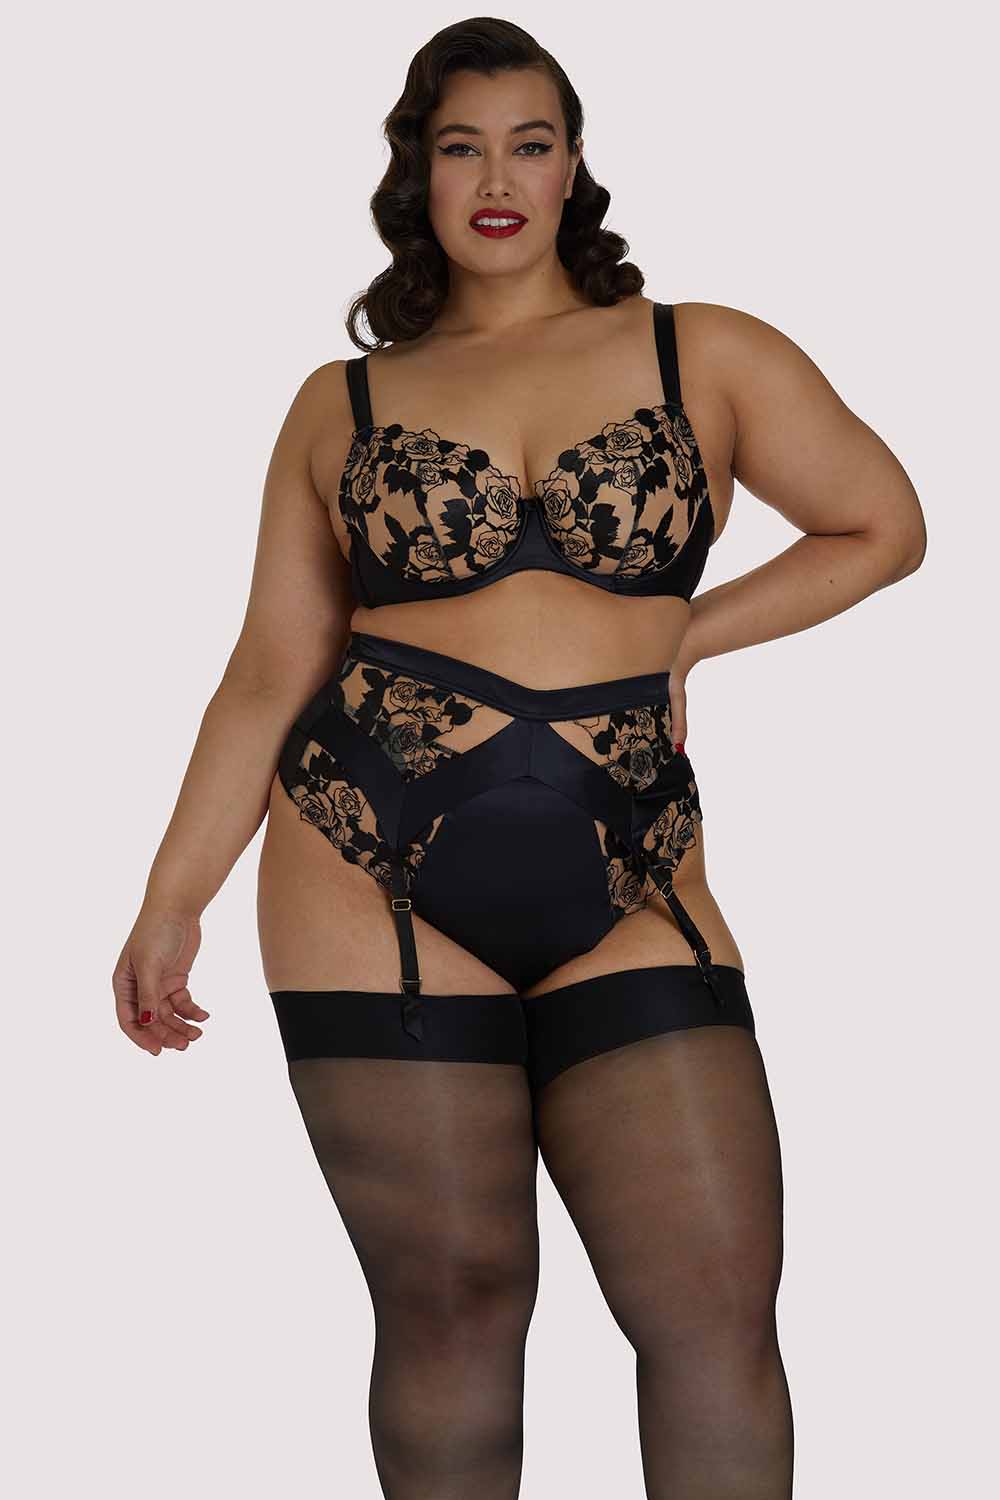 Madame X Black Suspender Belt - For Her from The Luxe Company UK